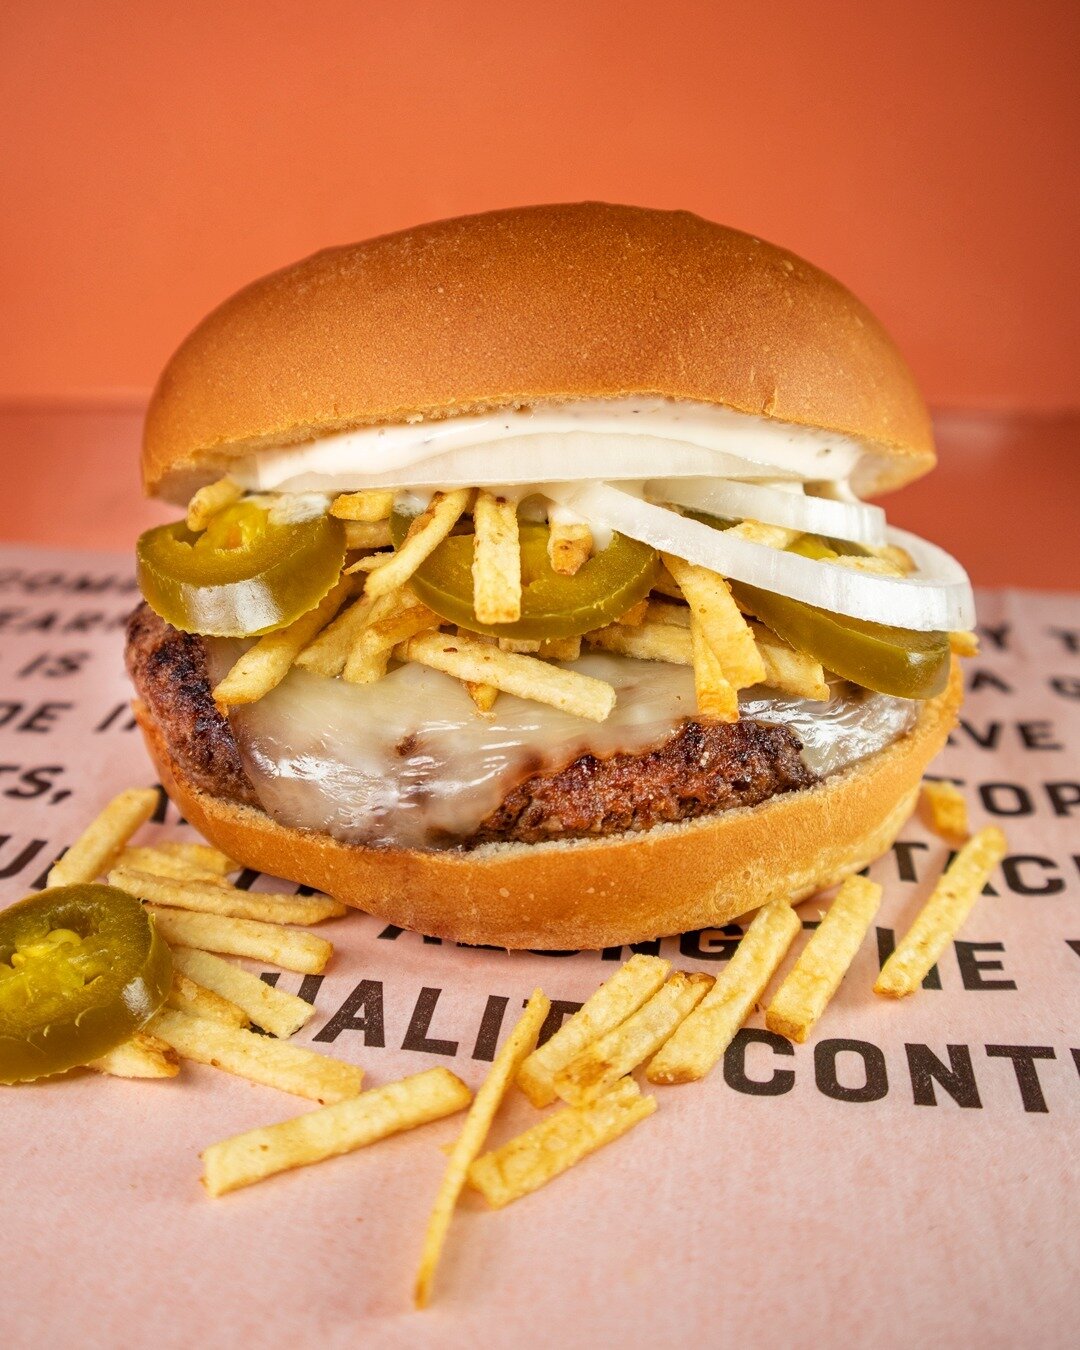 We&rsquo;re always trying to bring you something new, so for a limited time, come try our Jalape&ntilde;o crunch burger!